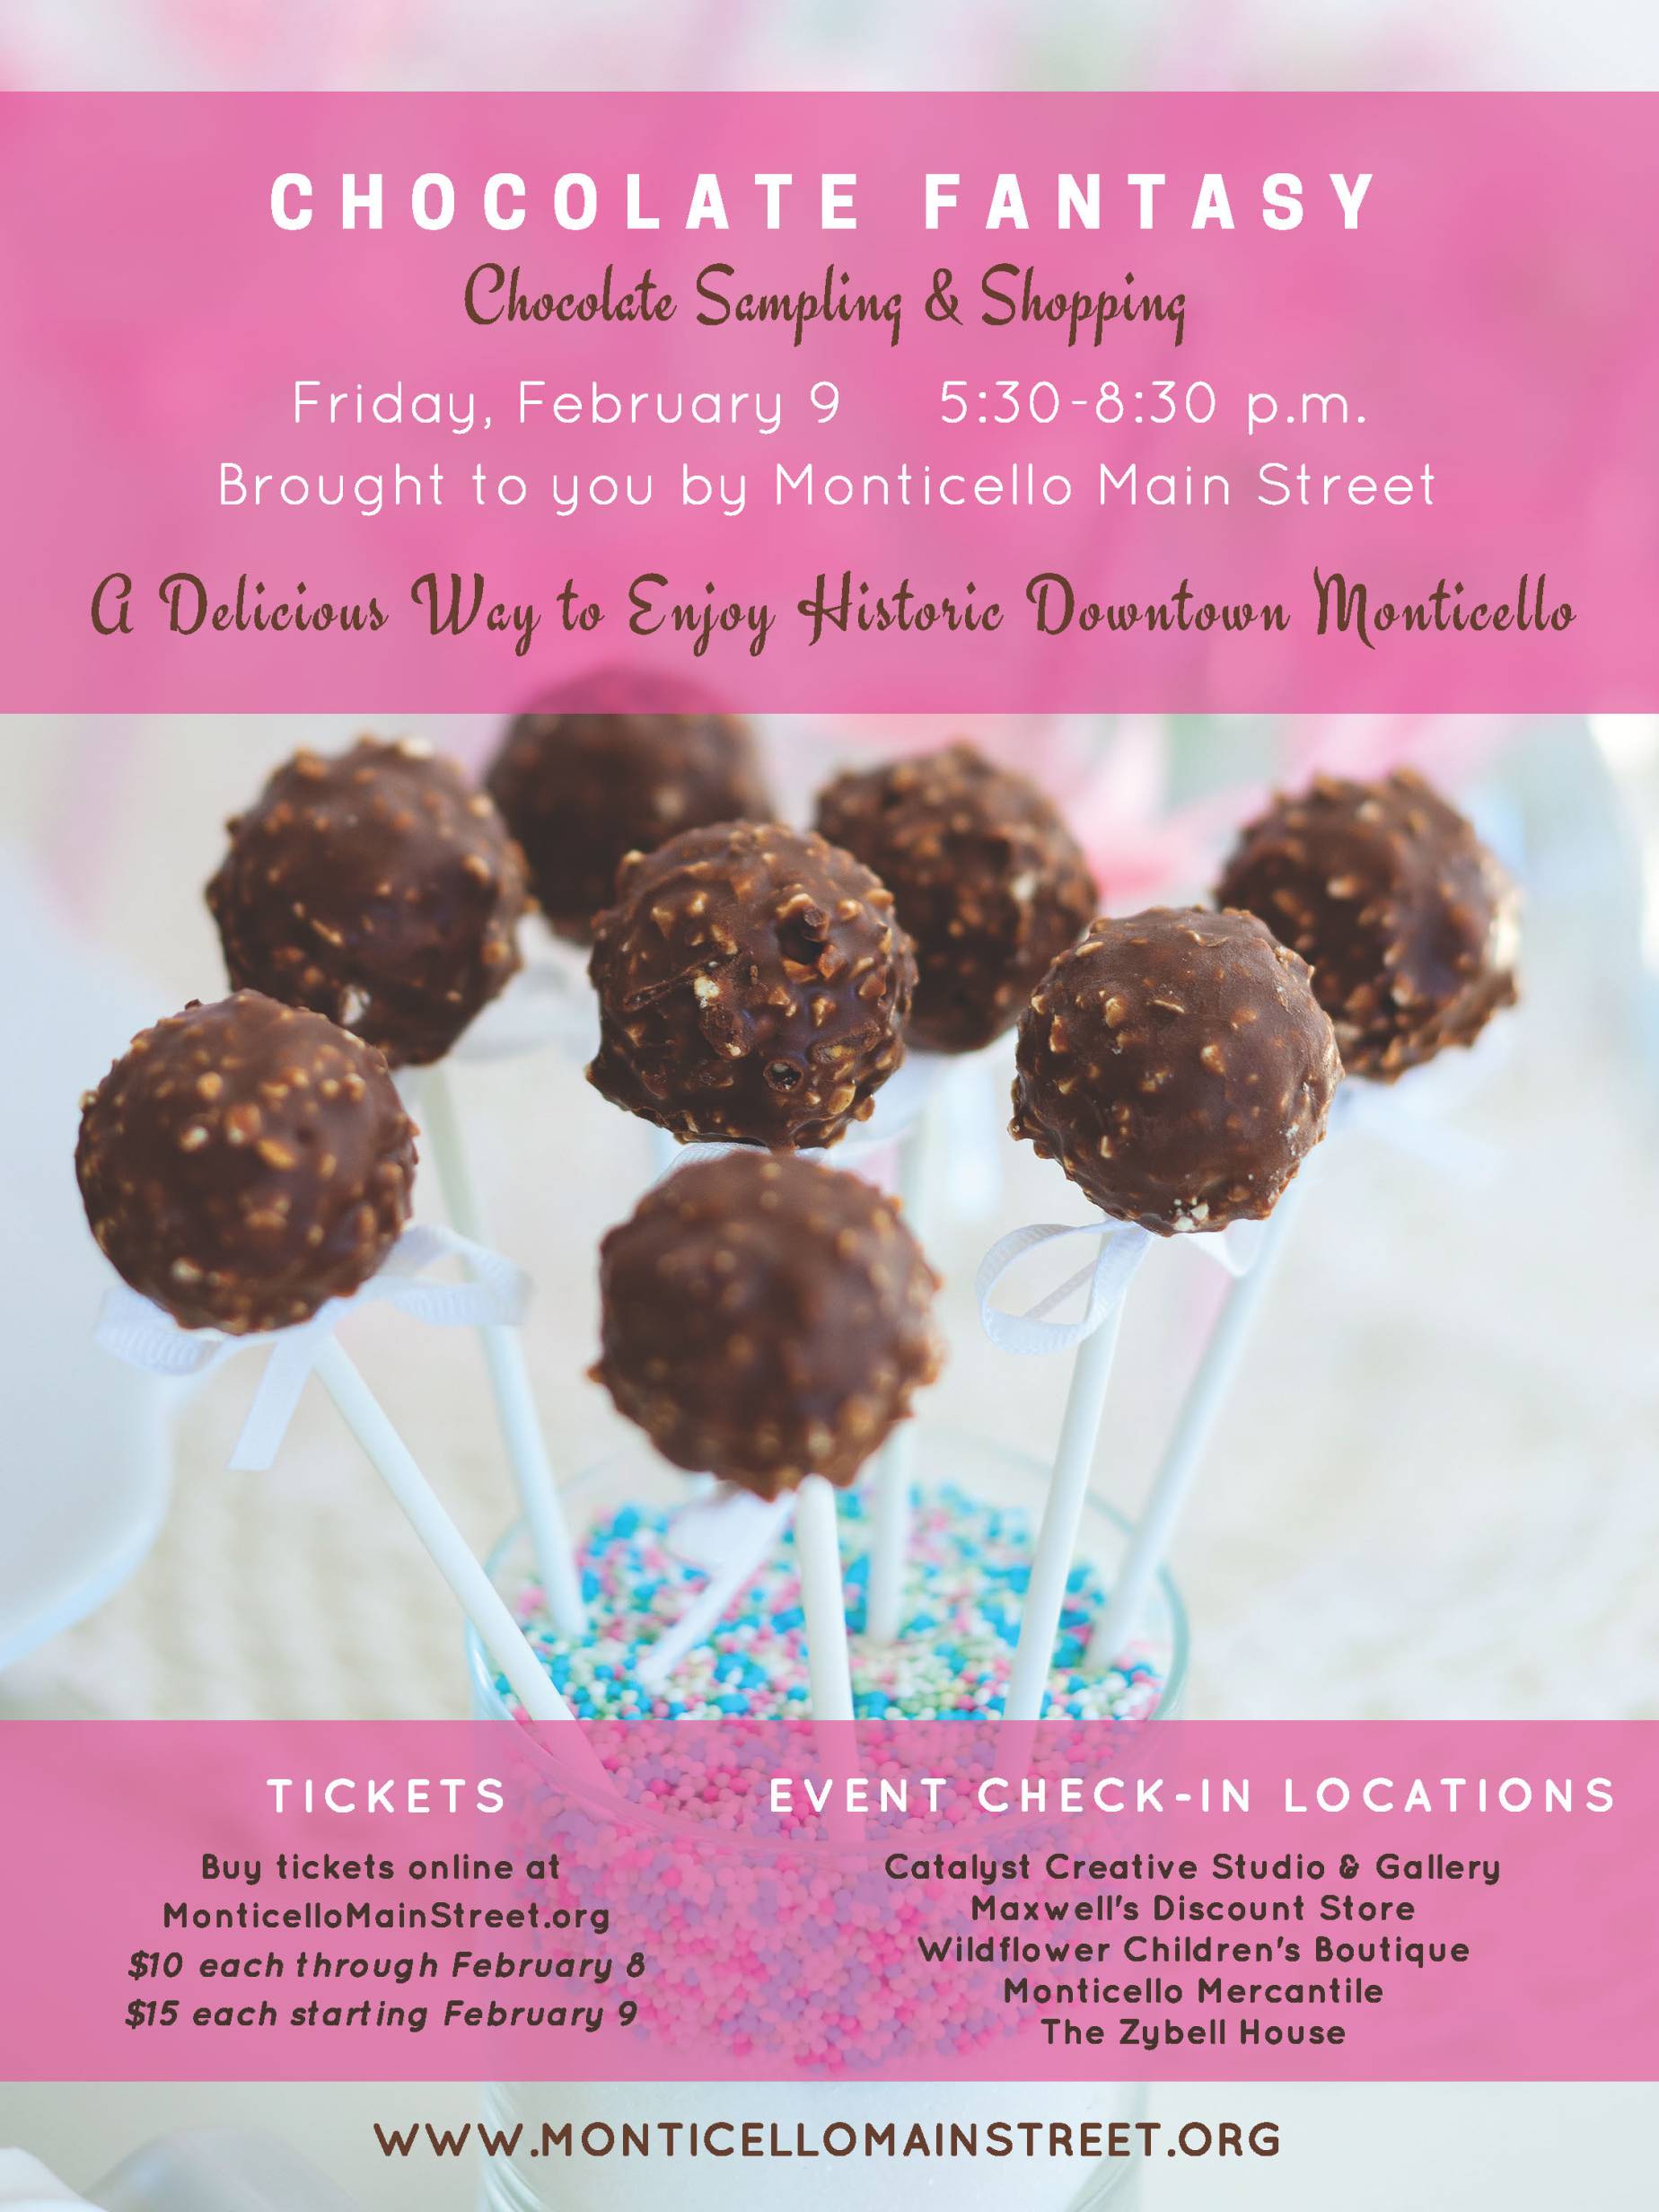 Chocolate Fantasy Fest taking place February 9th in Monticello